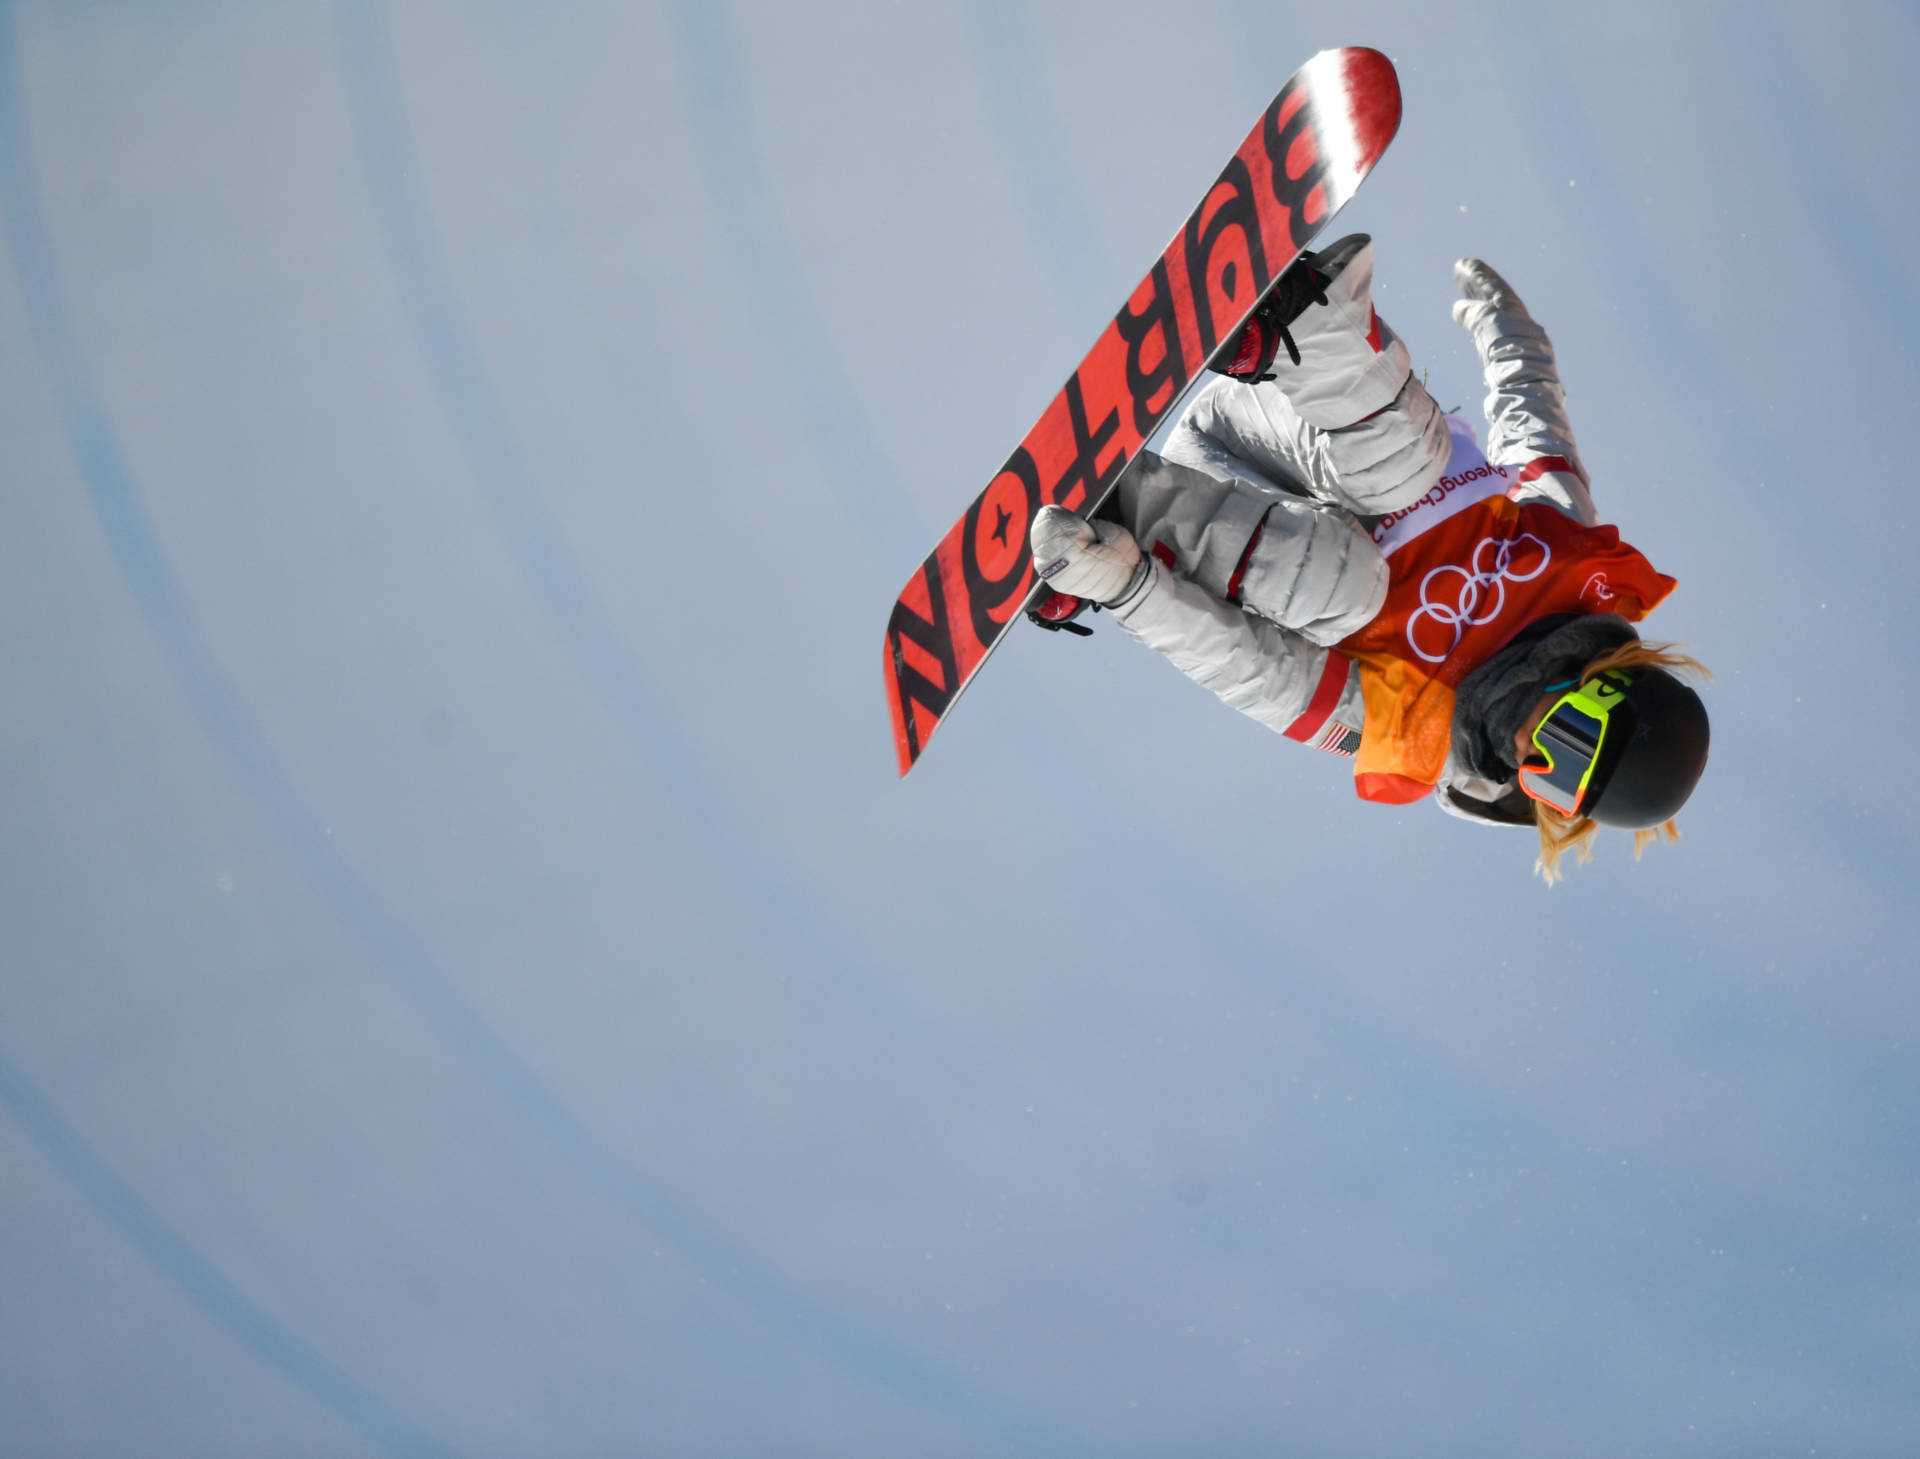 U.S. snowboarder Chloe Kim, 17, soars to a gold medal in the halfpipe. Ramsey Cardy/Sportsfile via Getty Images